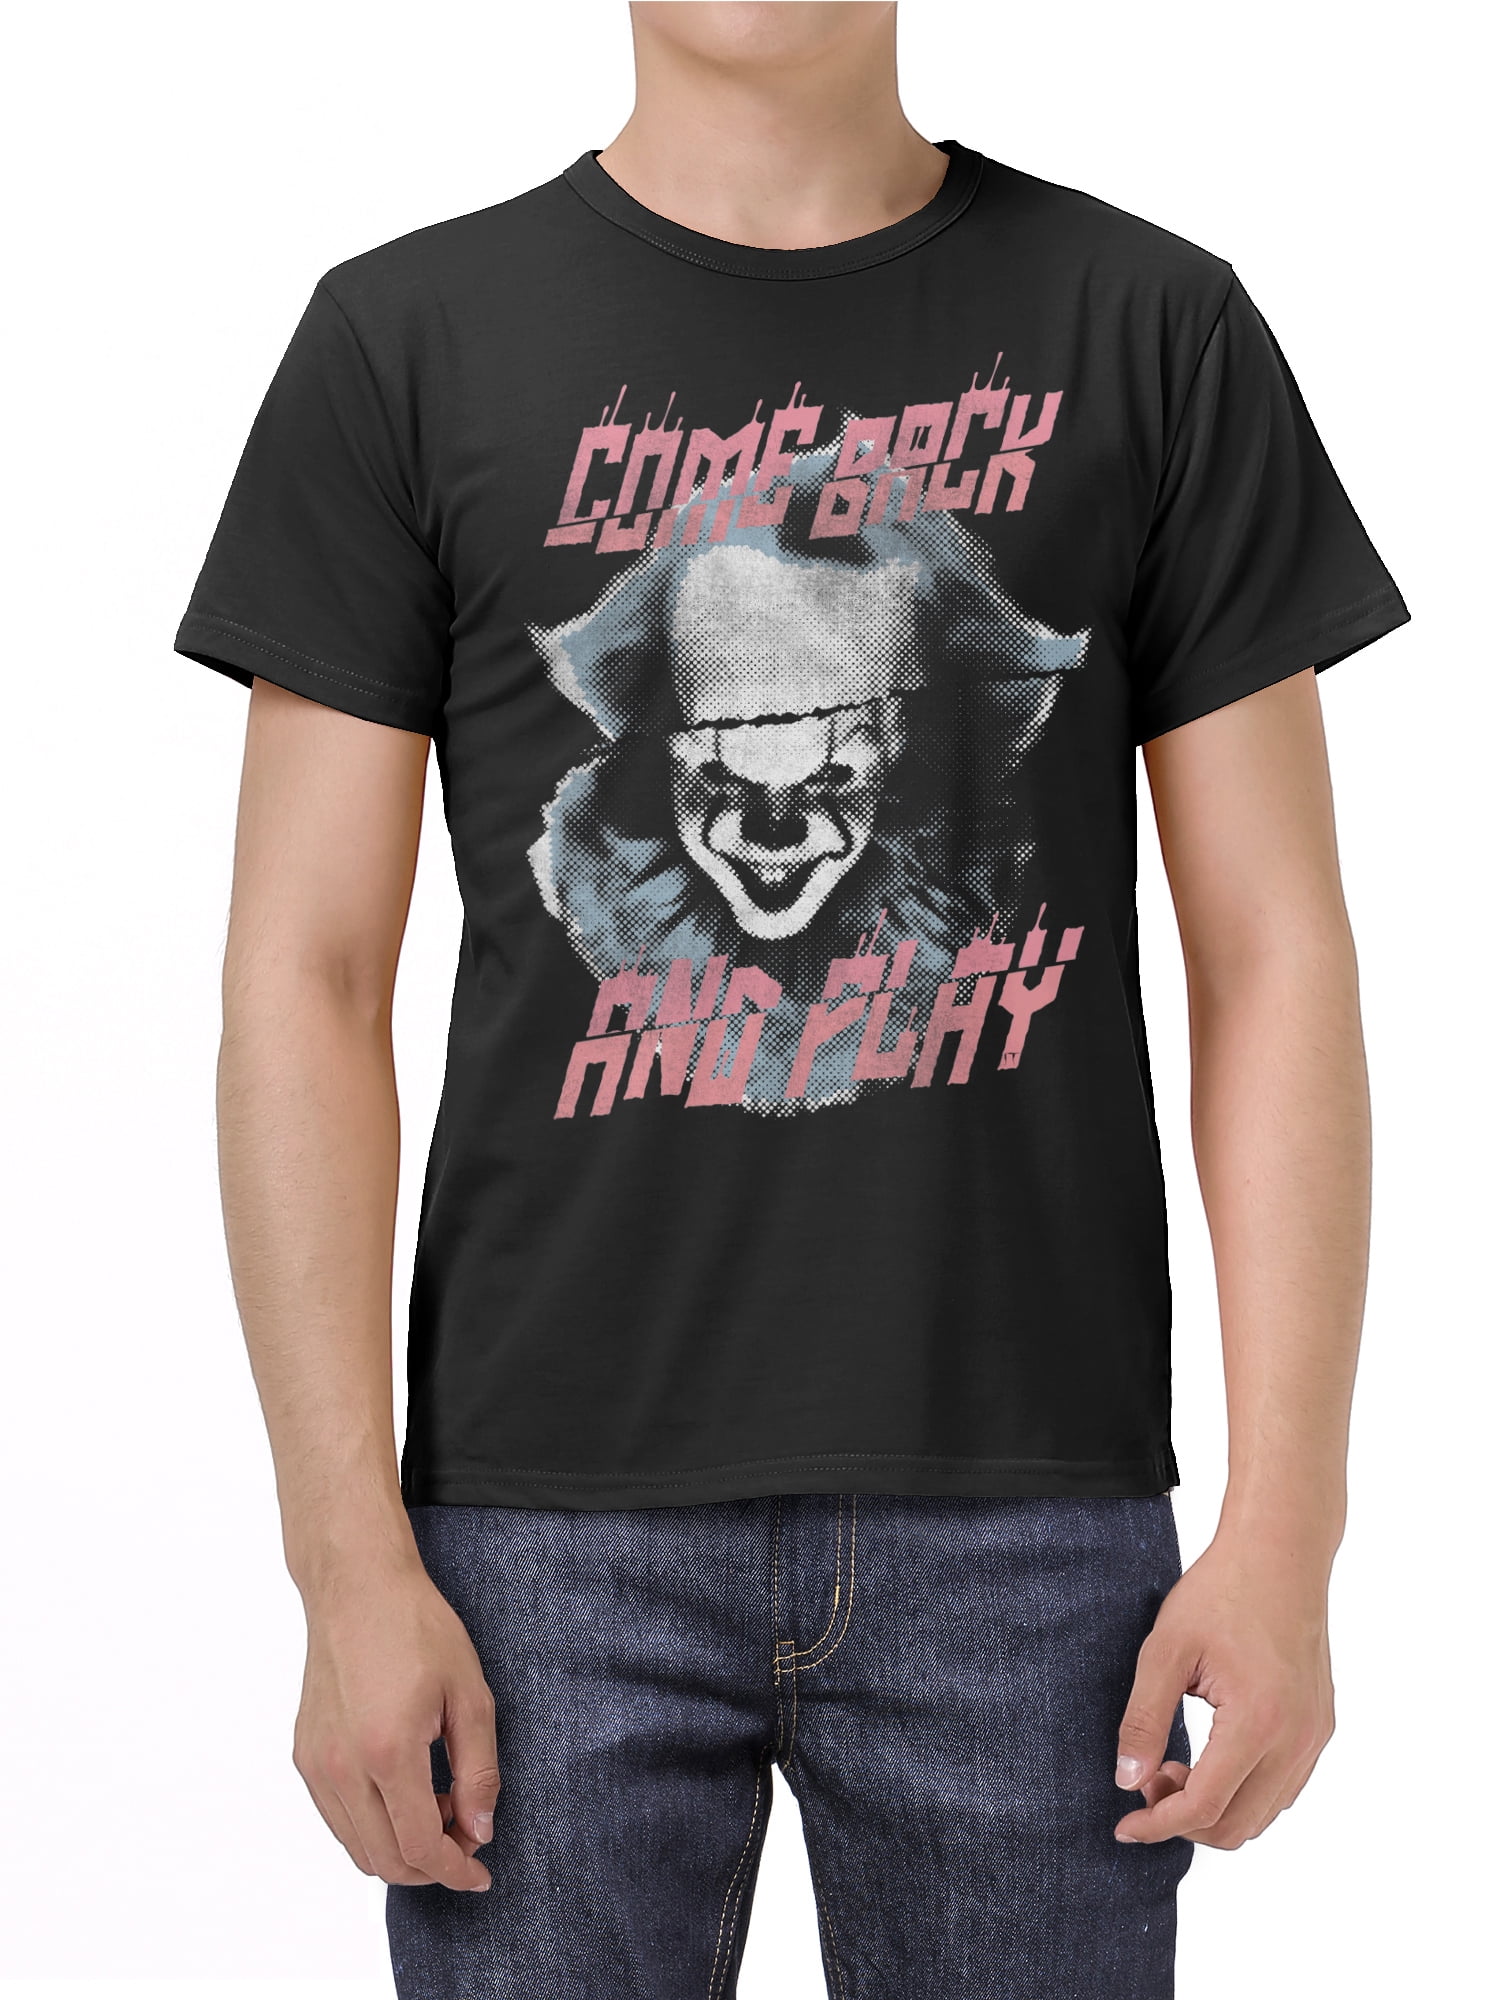 IT Clown Pennywise Horror Scary Kids T Shirt 